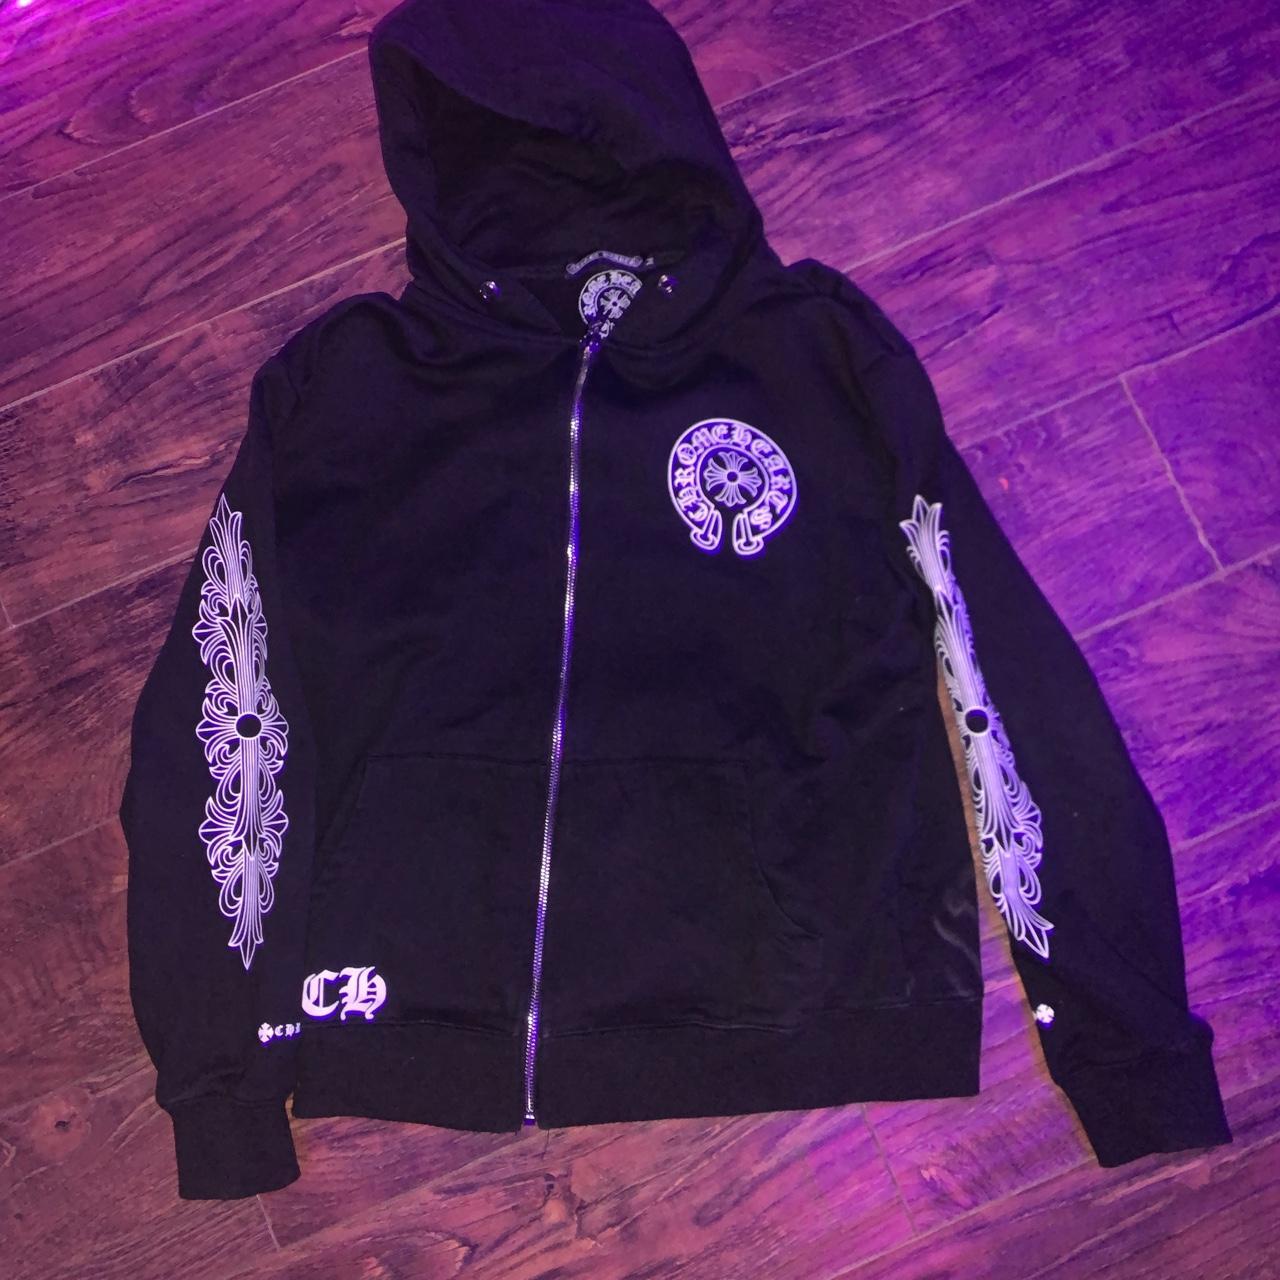 Chrome Hearts Los Angeles Jacket bought at the... - Depop